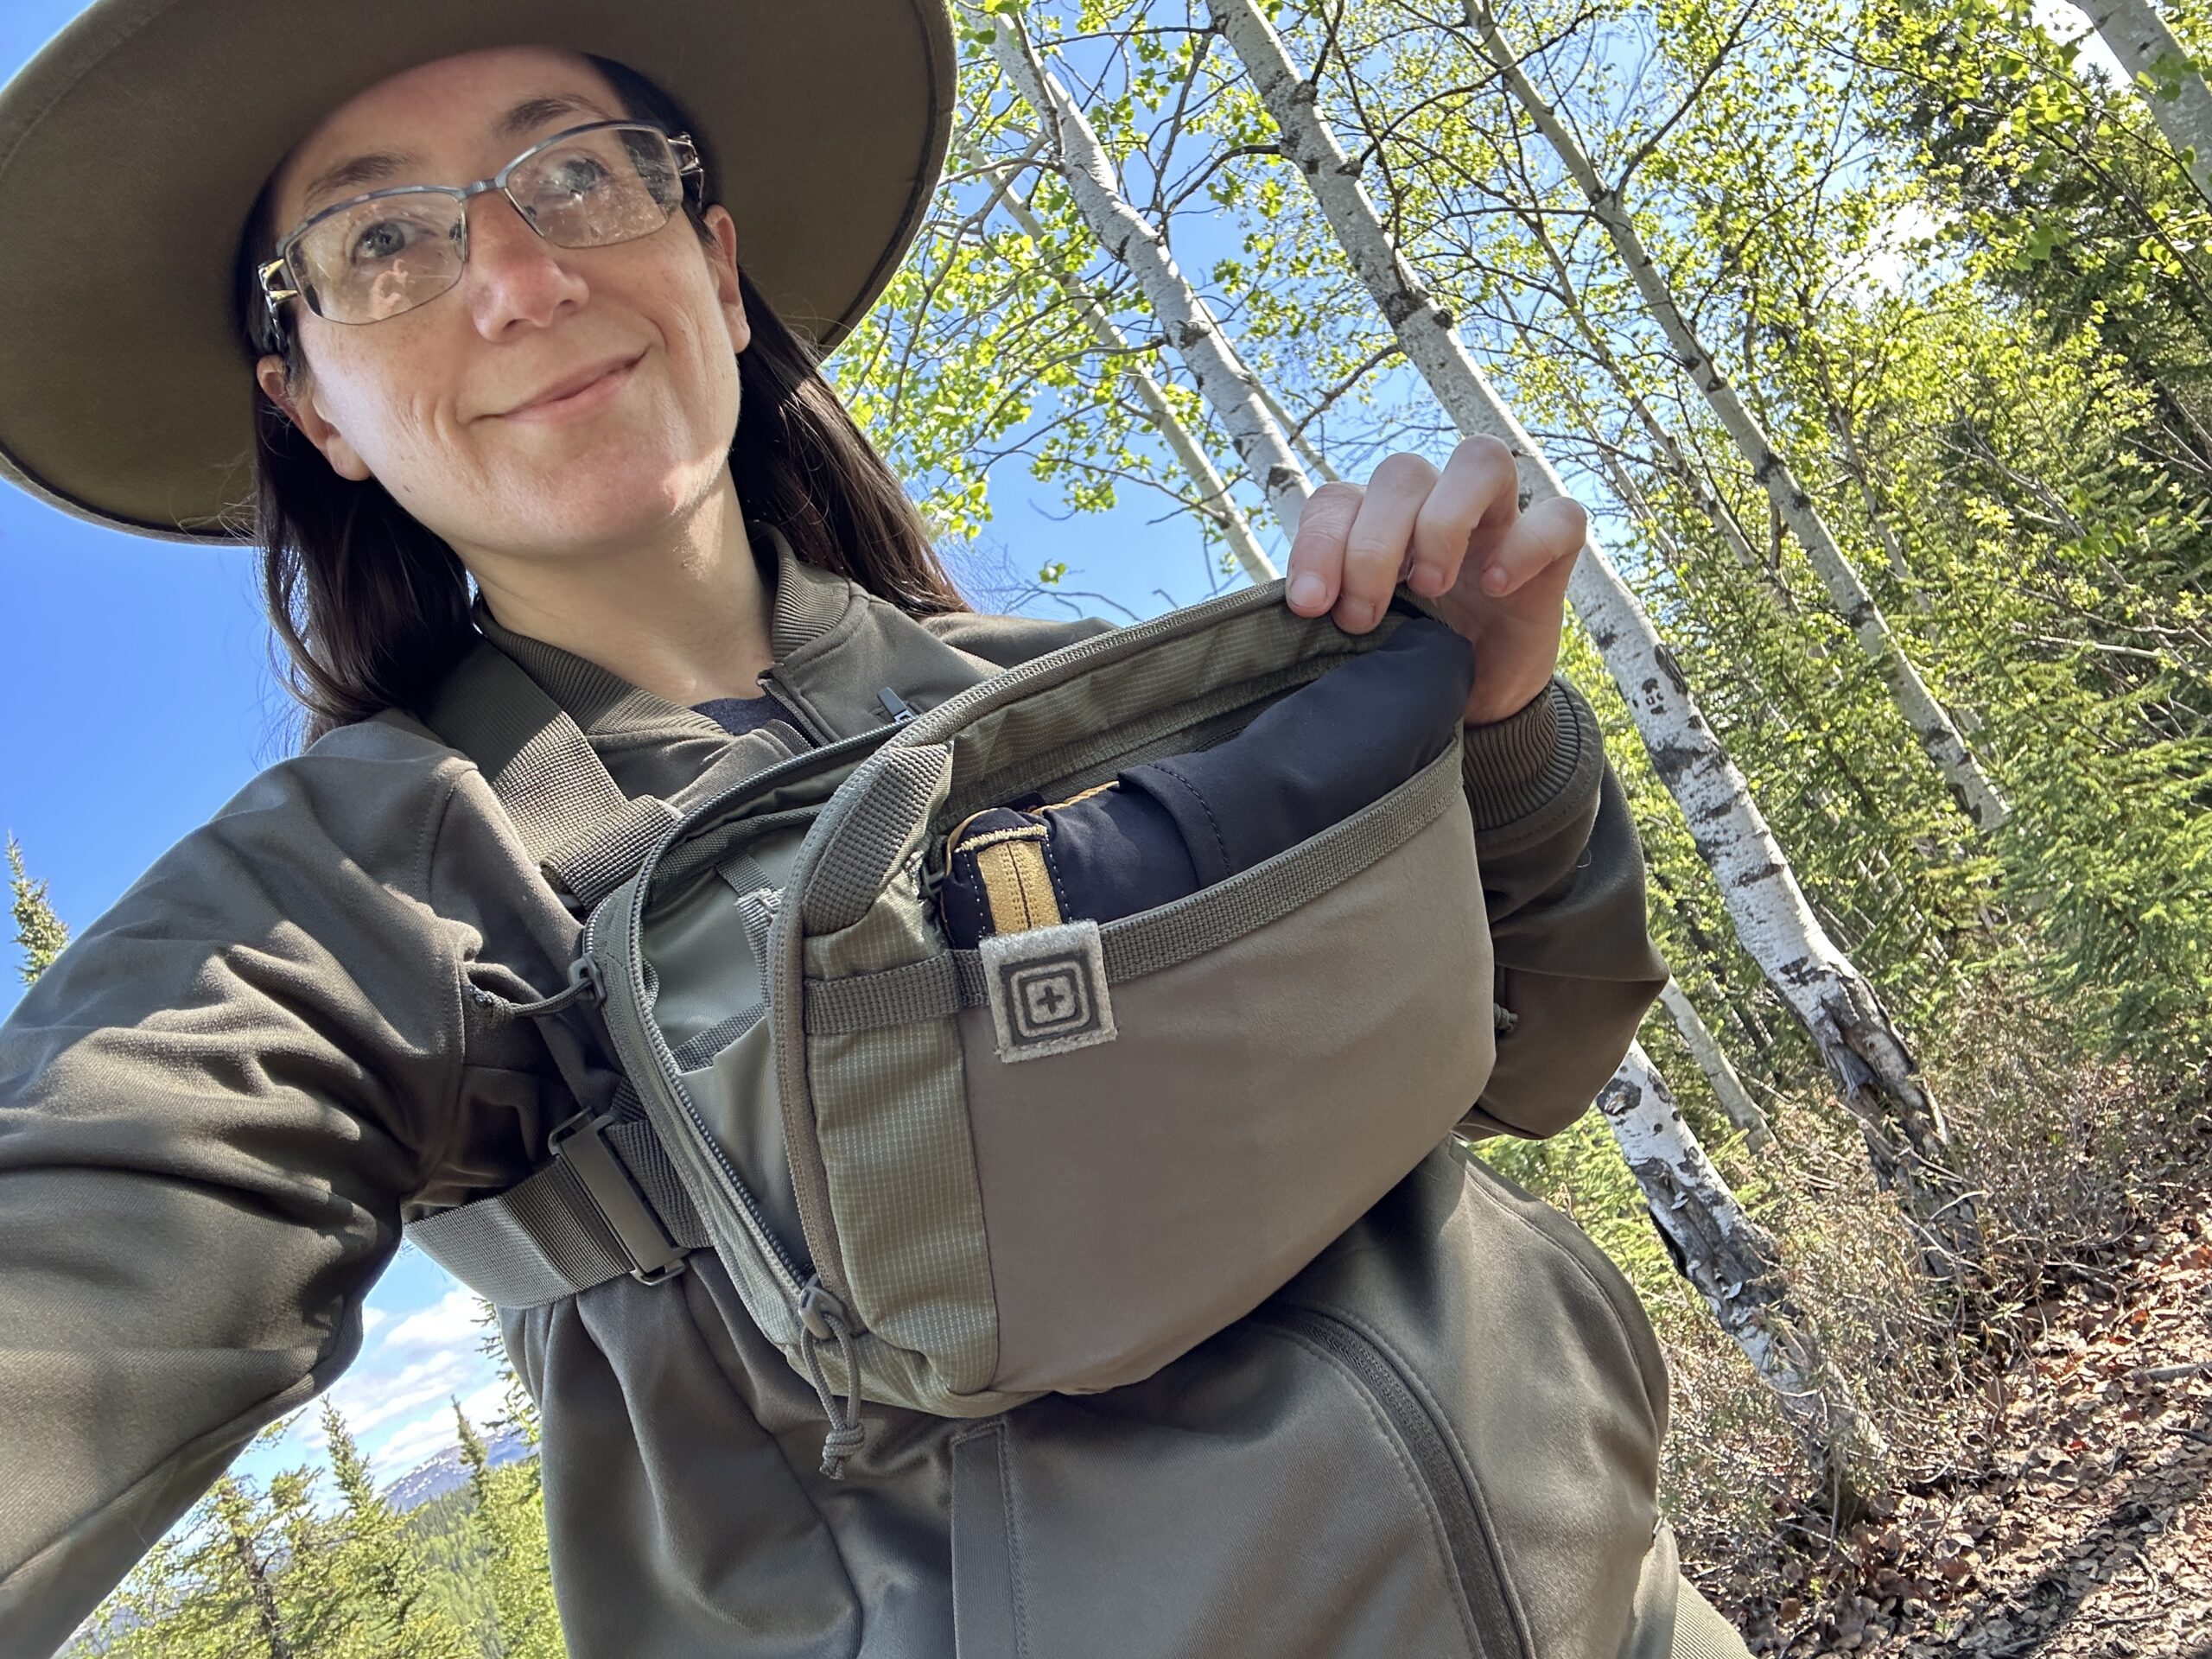 Review: 5.11 Skyweight Utility Chest Pack - Perfect for Outdoor